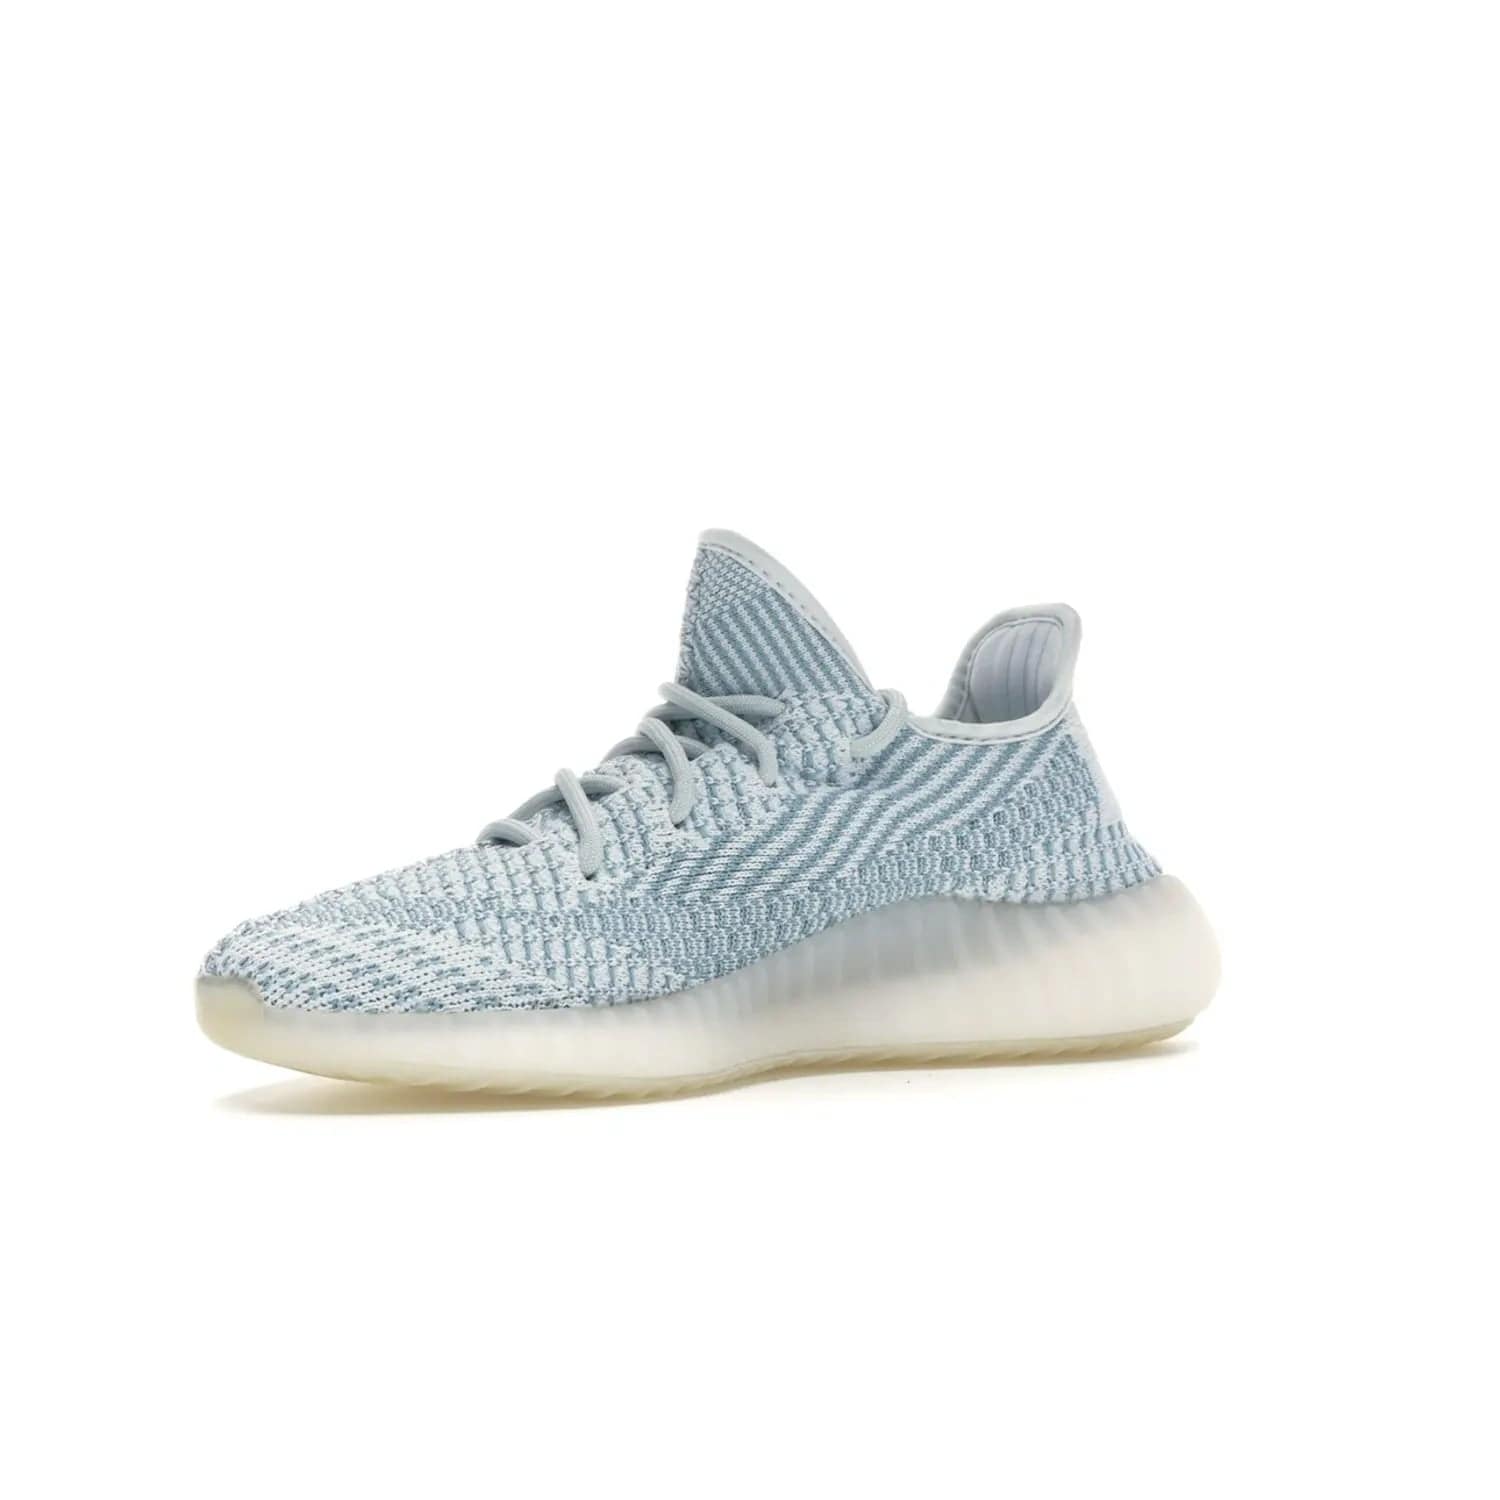 adidas Yeezy Boost 350 V2 Cloud White (Non-Reflective) - Image 16 - Only at www.BallersClubKickz.com - Adidas Yeezy Boost 350 V2 Cloud White (Non-Reflective) features Primeknit fabric and a unique, eye-catching design of cream, bluish-white, and transparent strip. Step out in timeless style with this eye-catching sneaker.